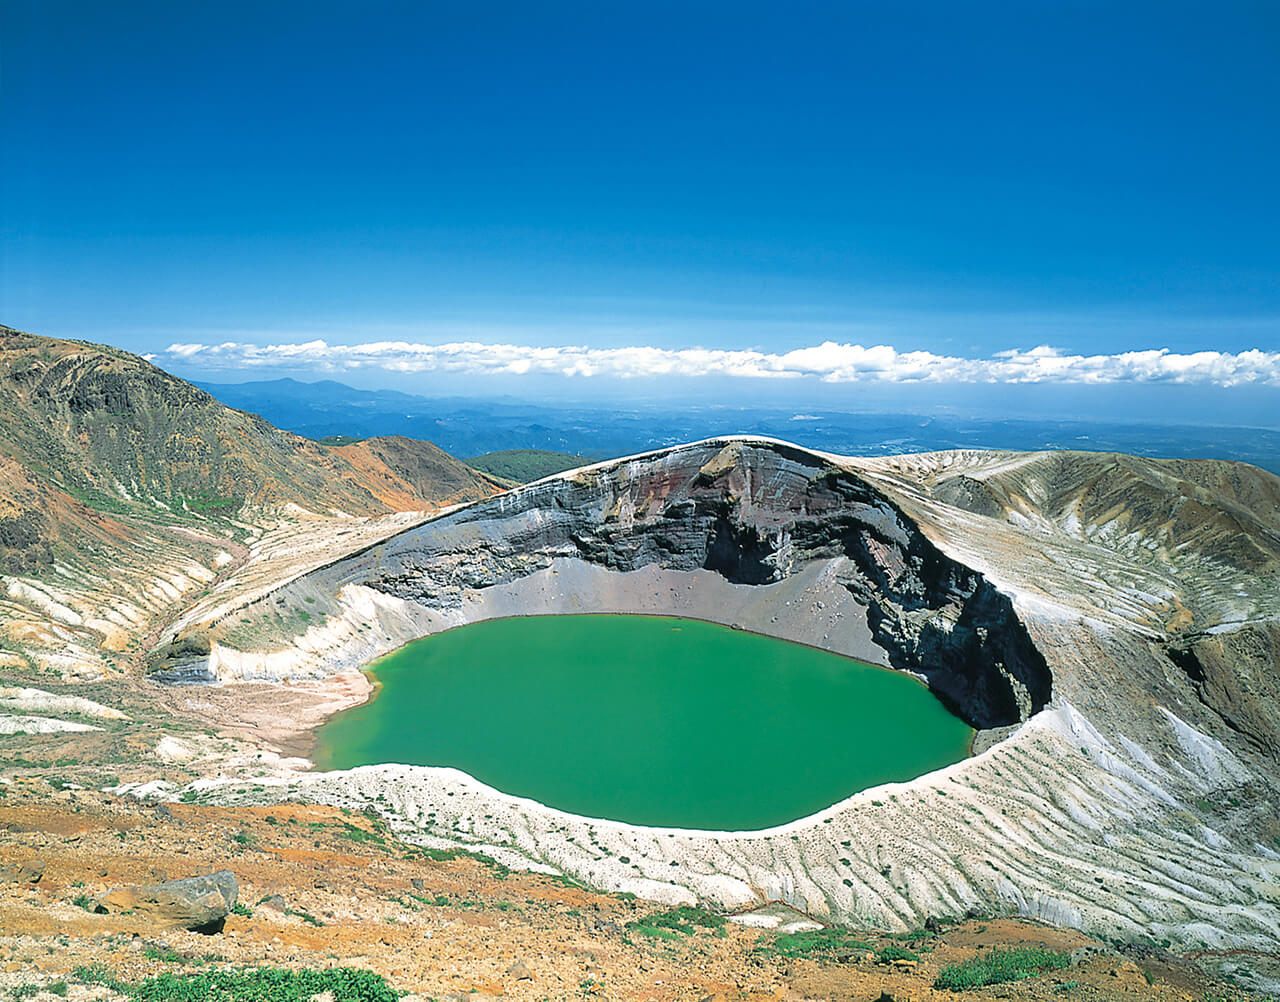 The symbol of the Zao mountains: the Okama Crater！